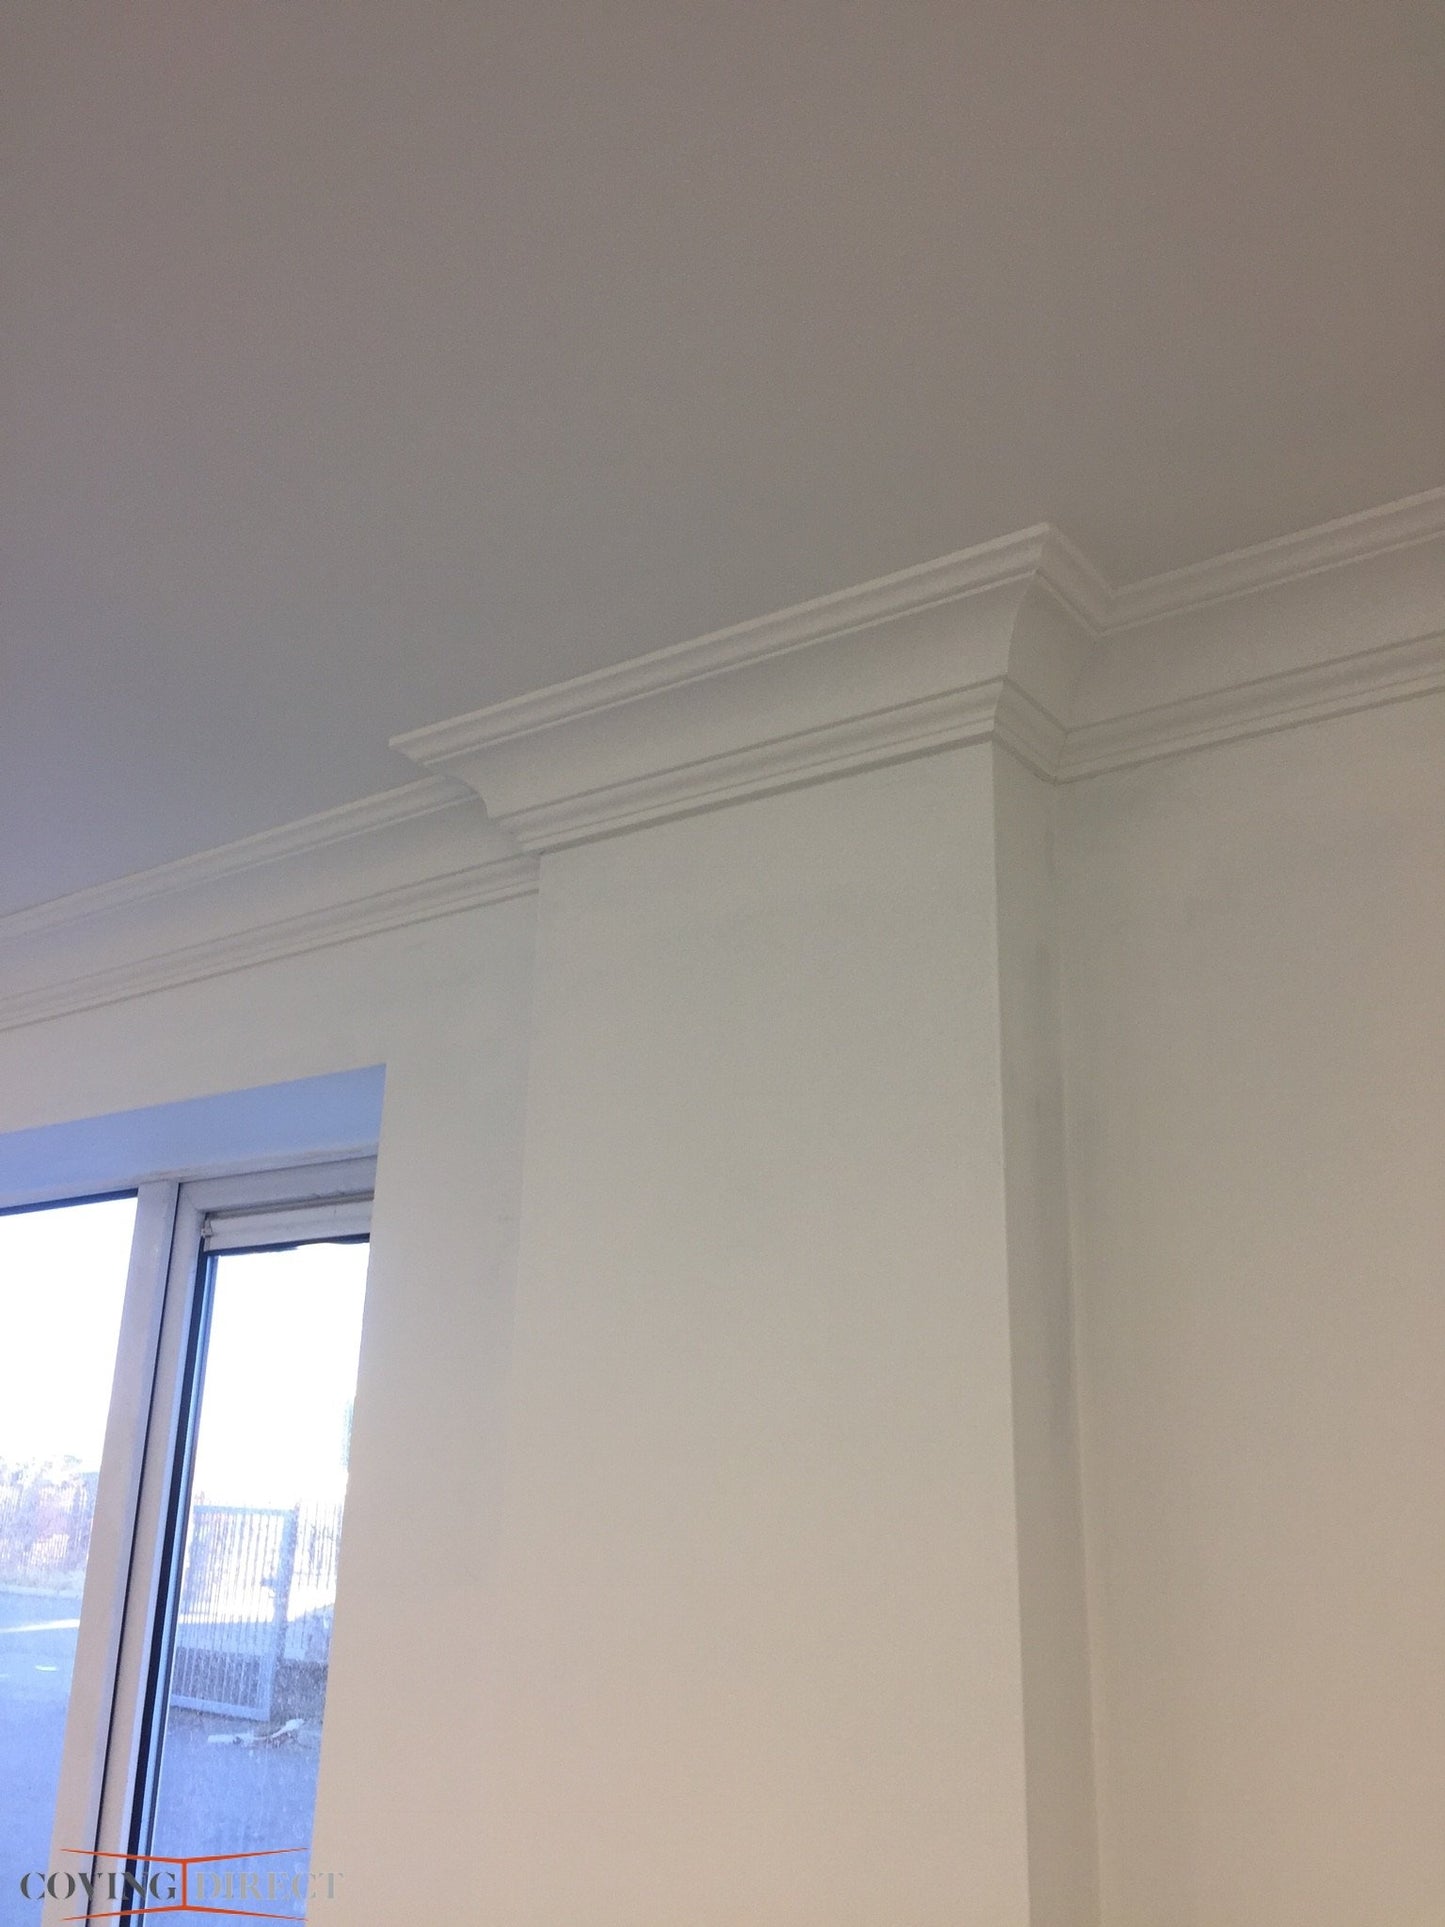 Crown - Classic Coving installed in a room with a light colour scheme